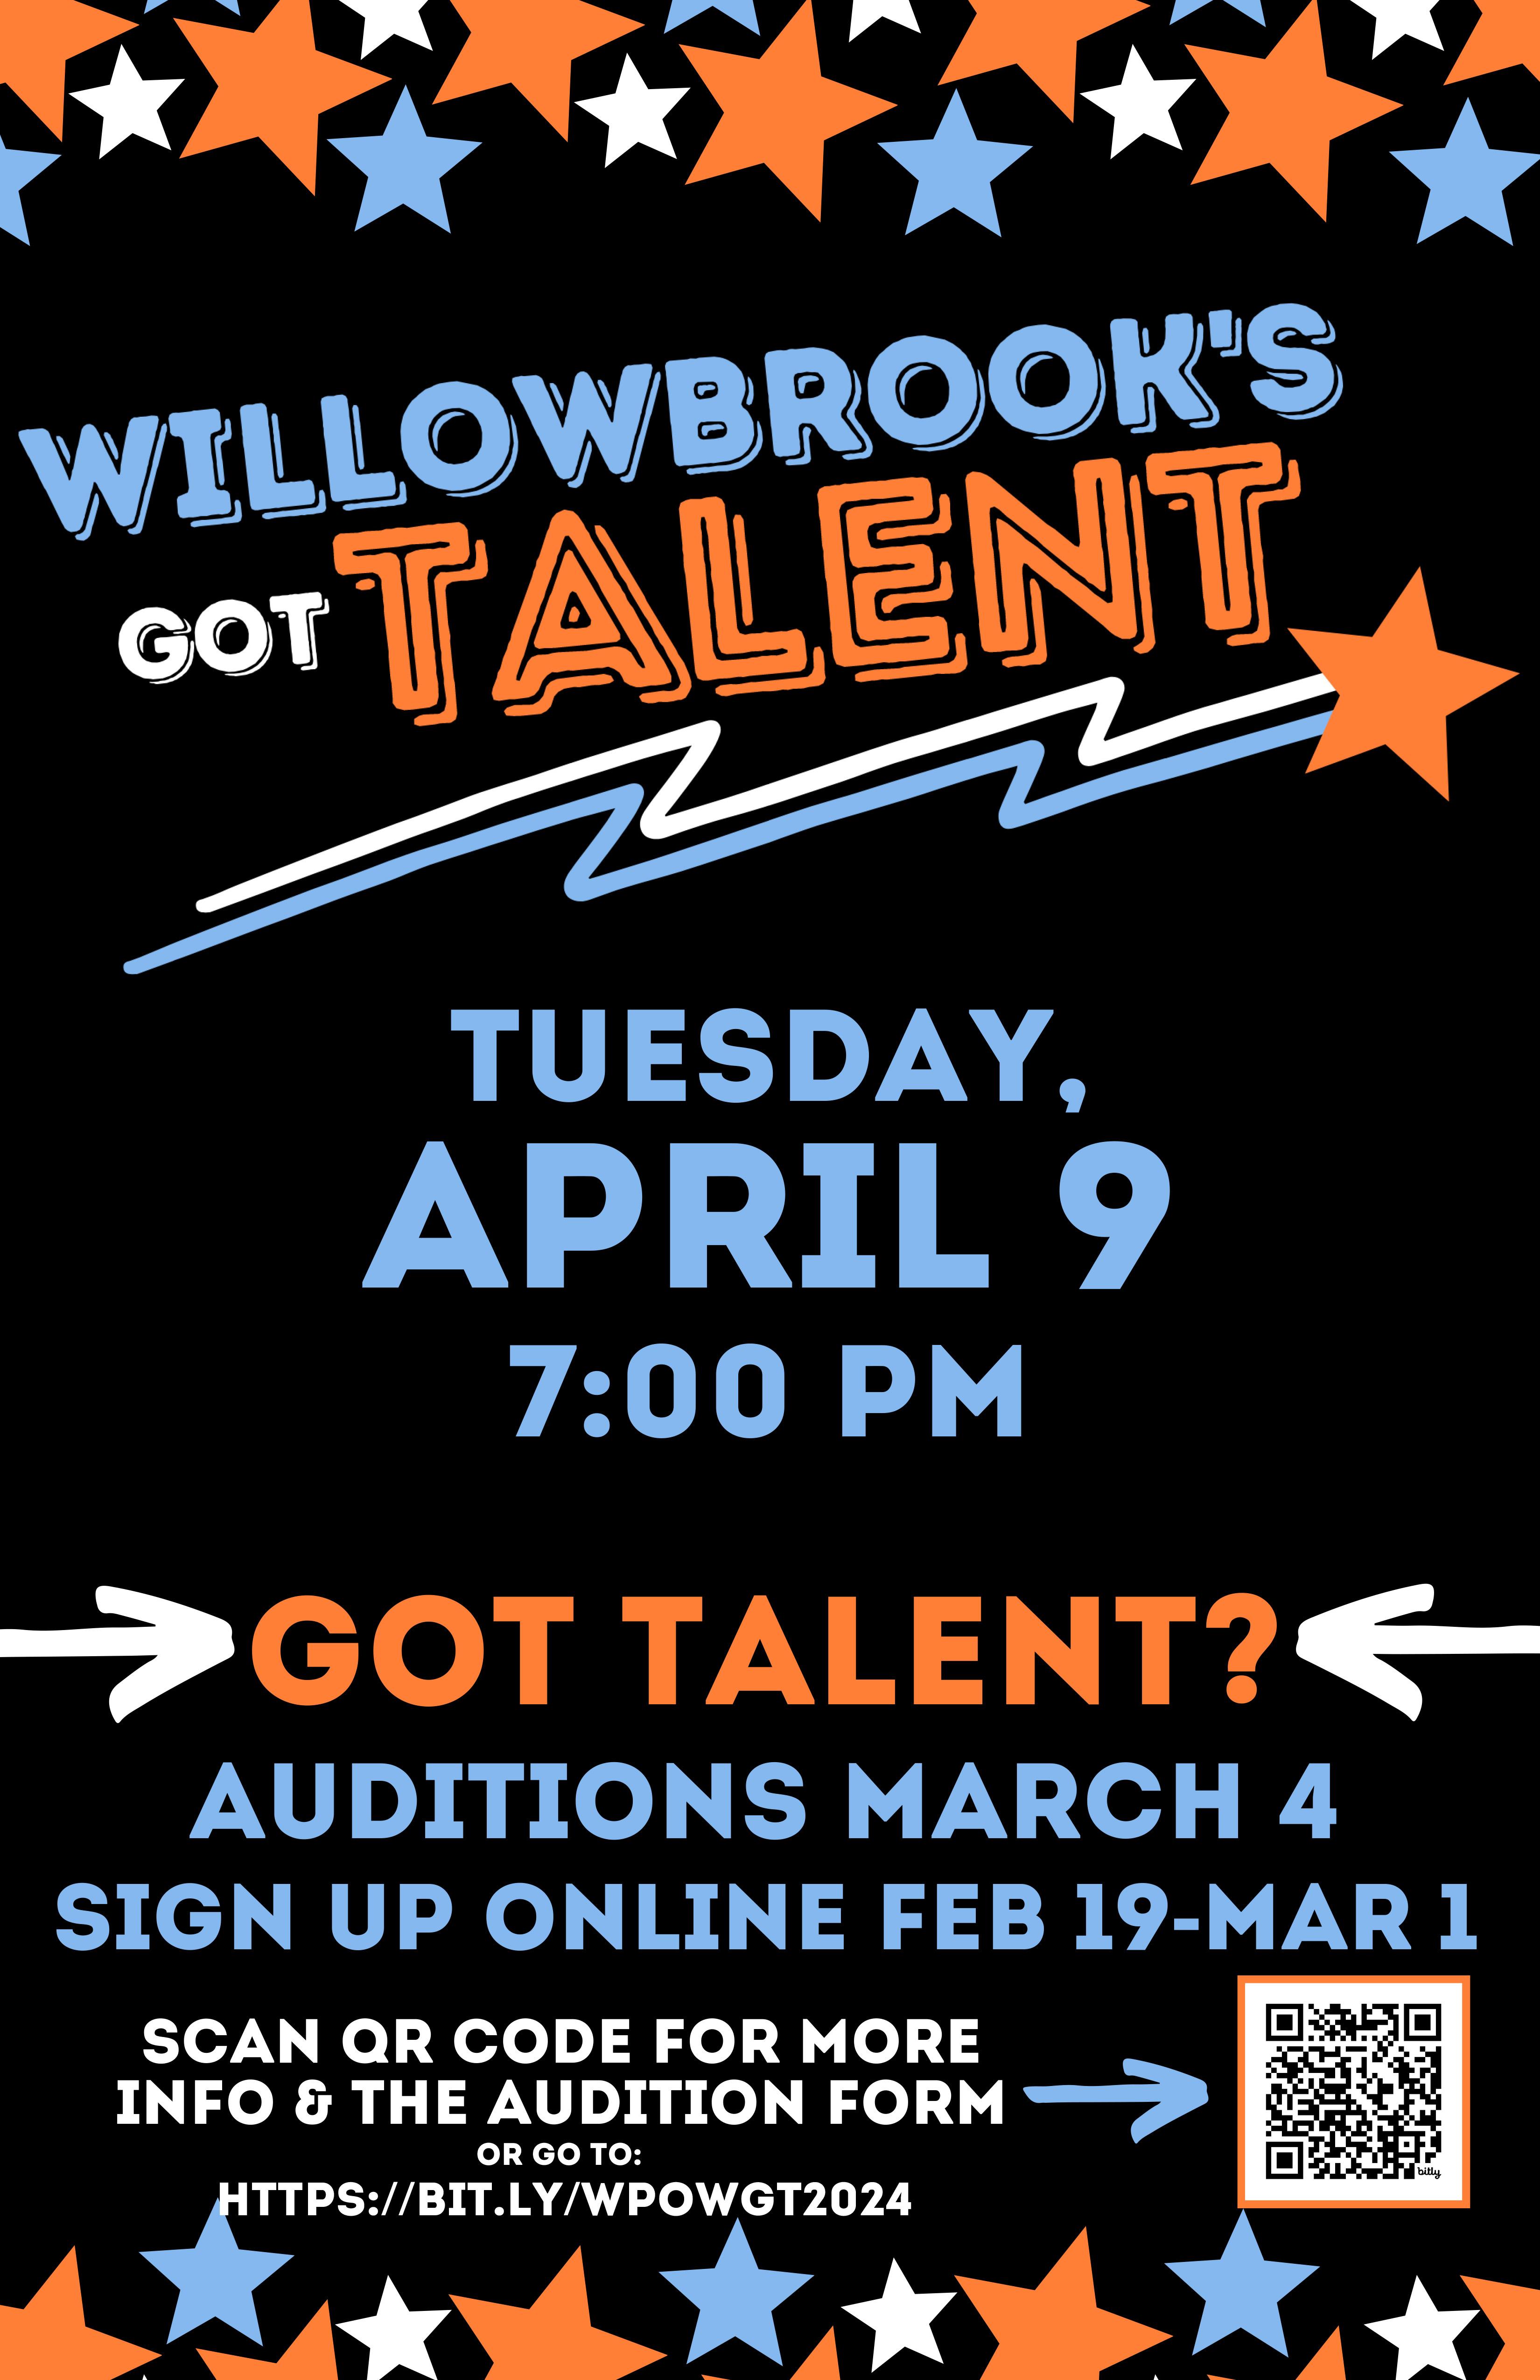 Willowbrook students and staff invited to audition for ‘Willowbrook’s Got Talent’ variety show